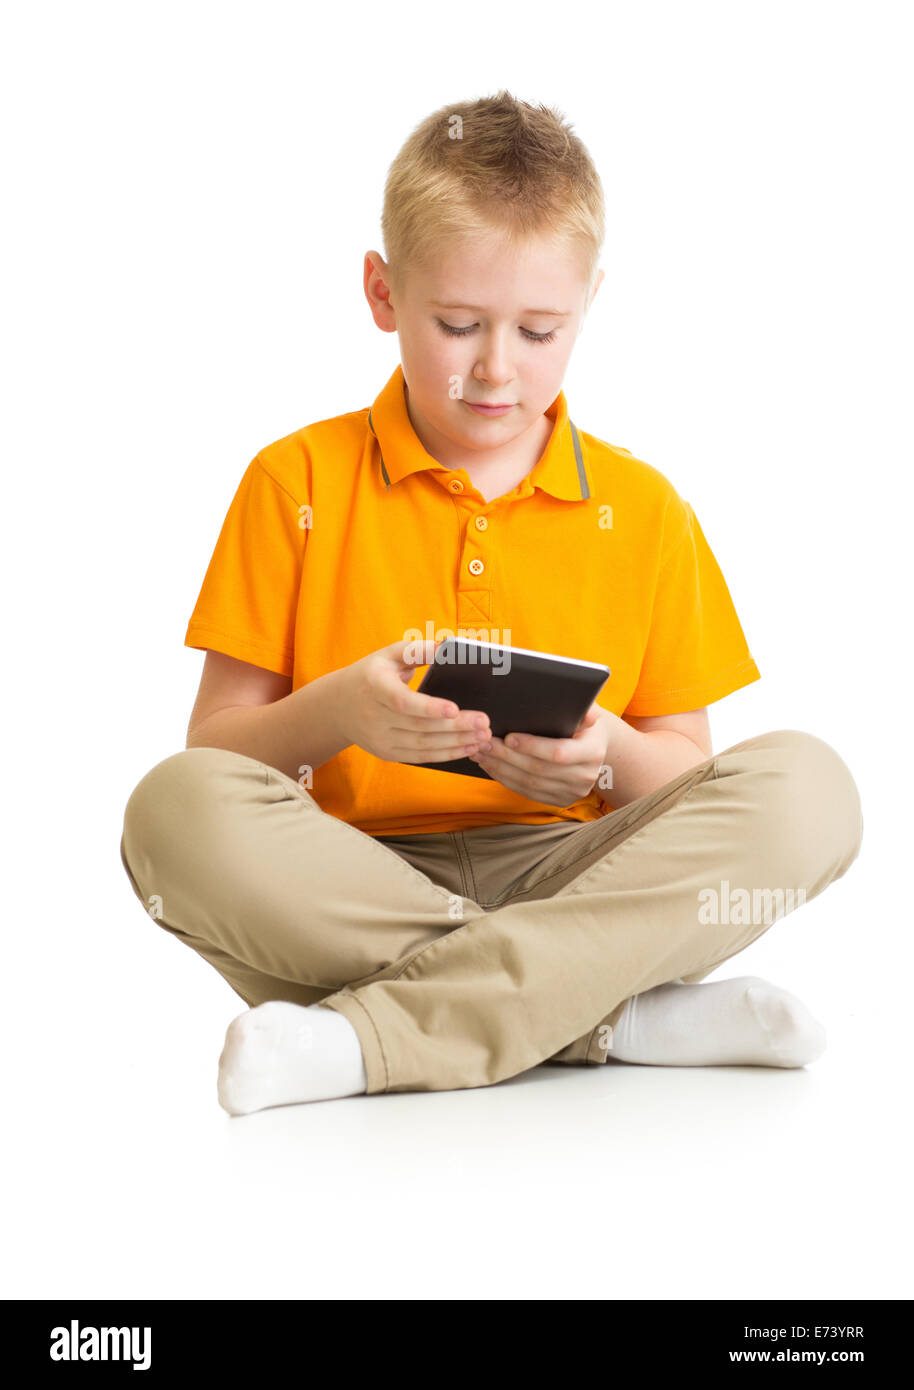 Pensive kid boy sitting with tablet pc ou isolés phablet Banque D'Images